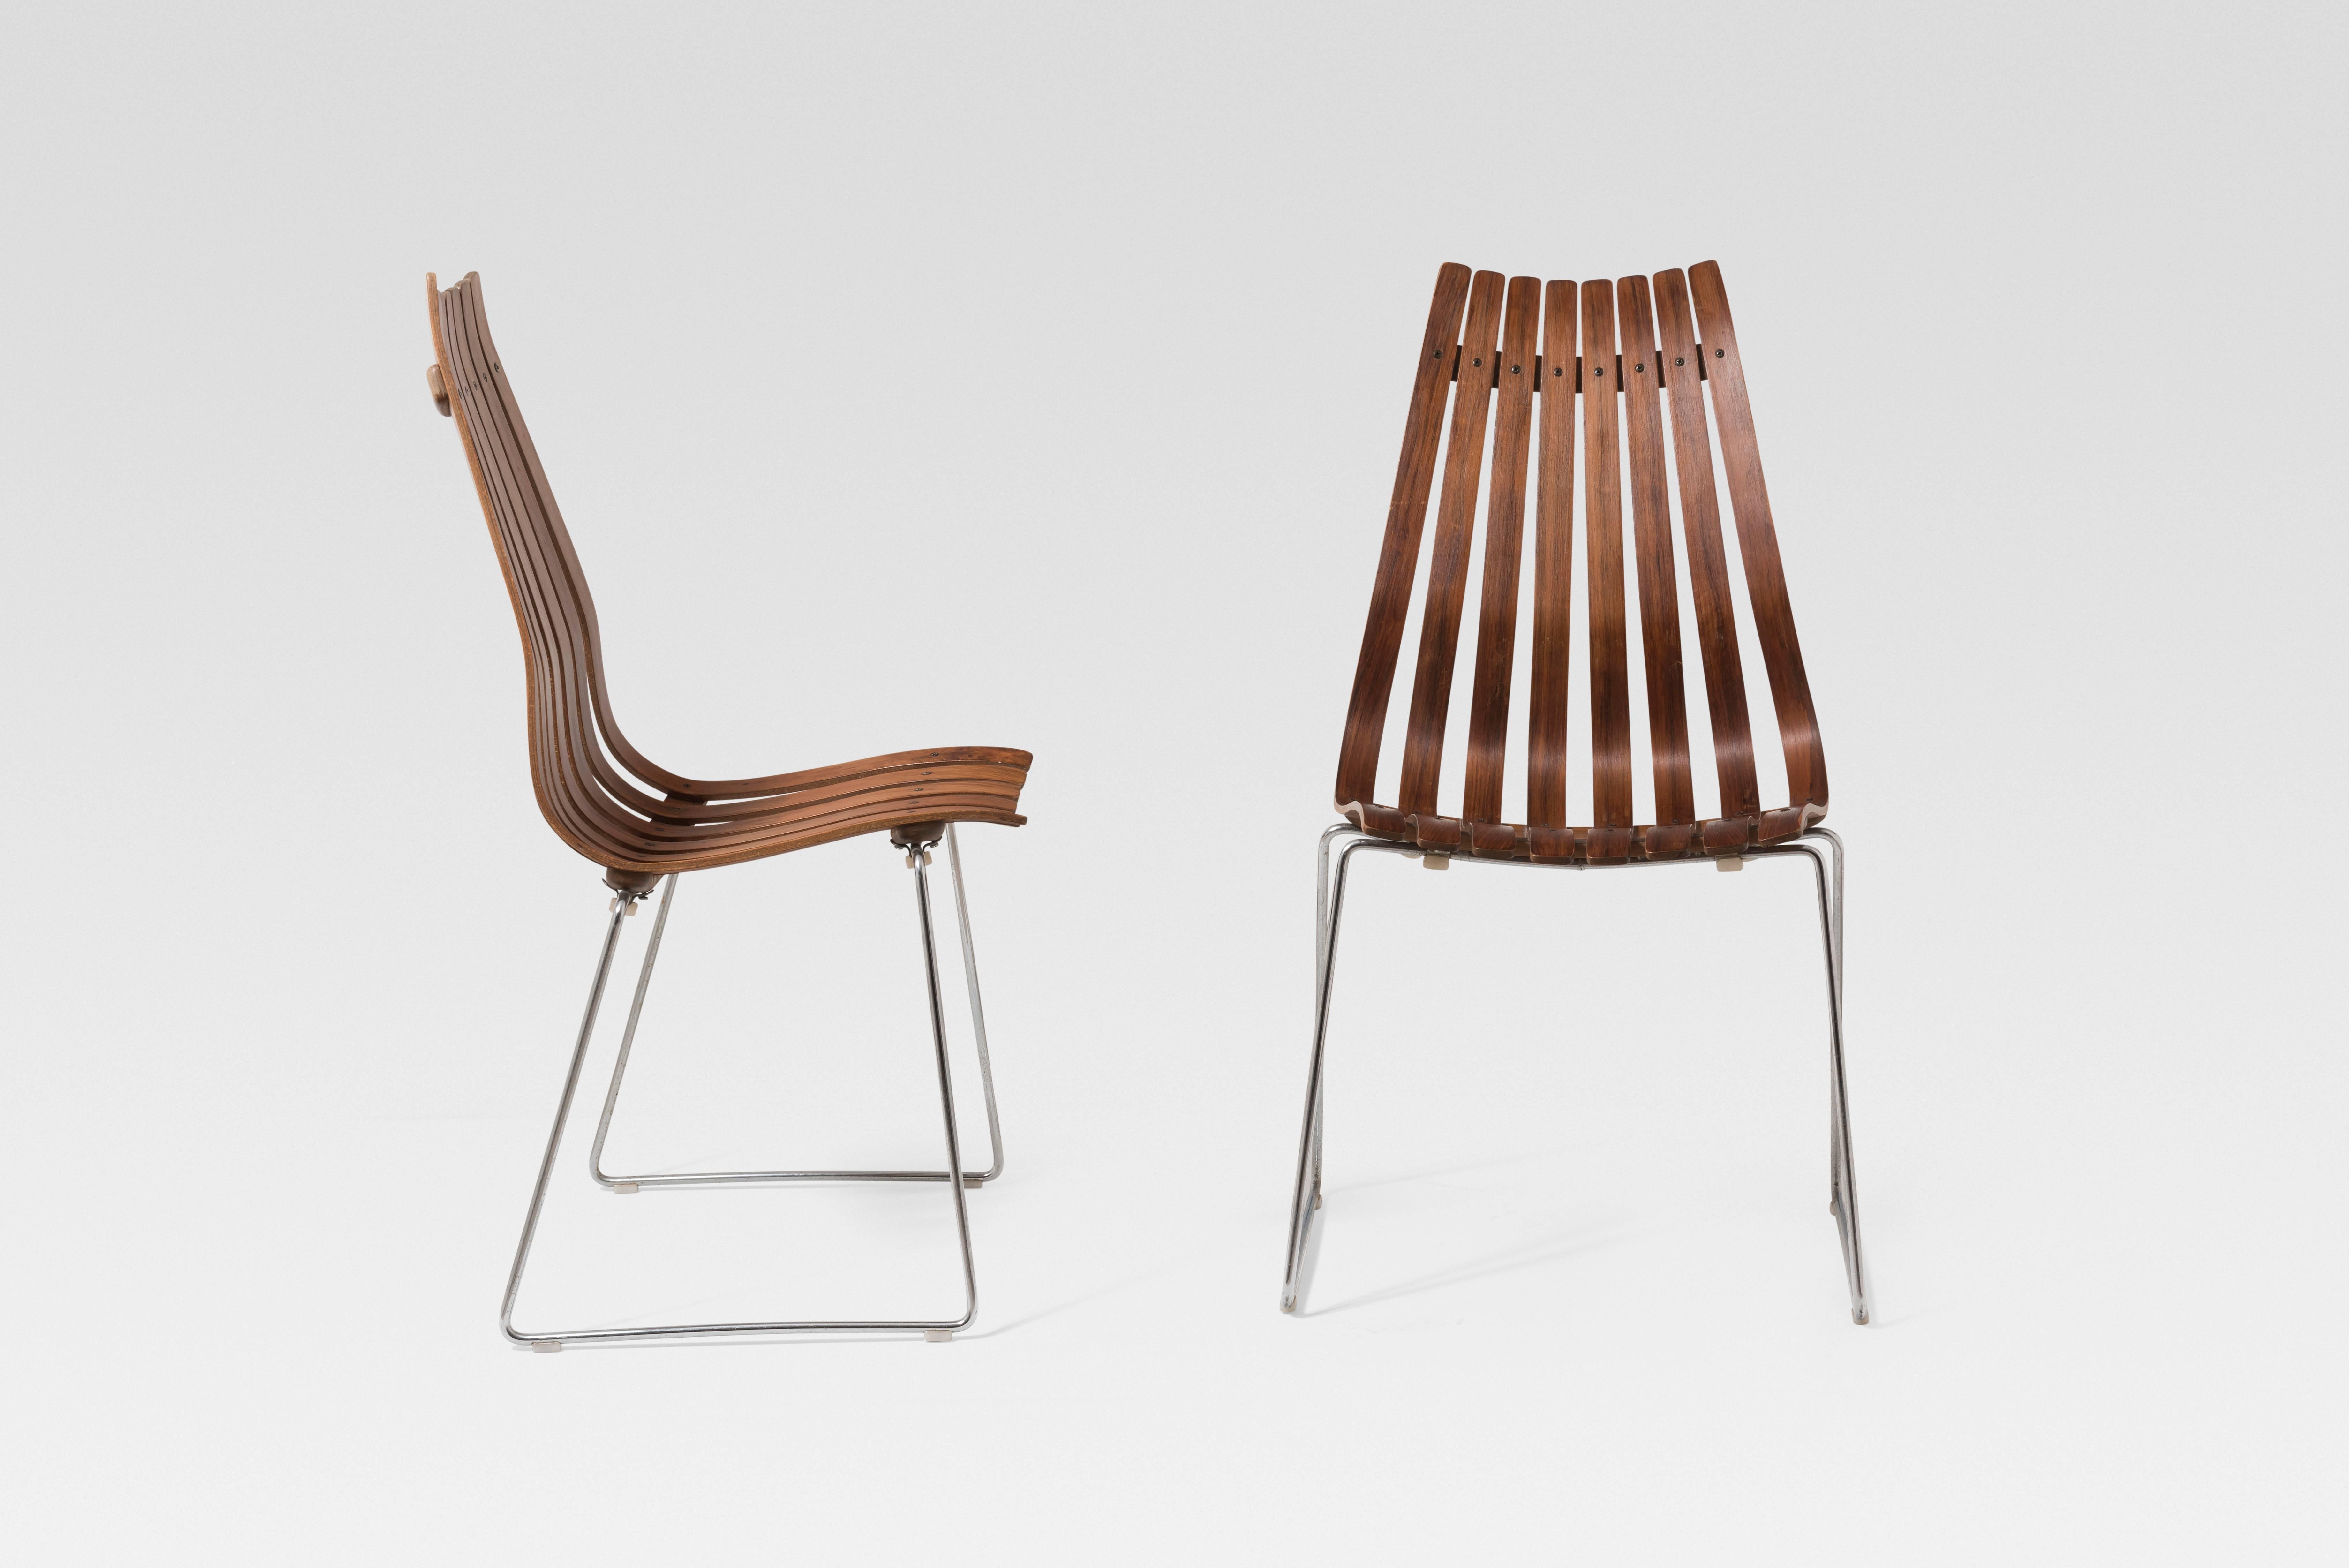 Hans Brattrud (born in 1933) 
Set of eight Scandia chairs
Manufactured by Hove Møbler, 
circa 1965
Chromed steel and rosewood.
  